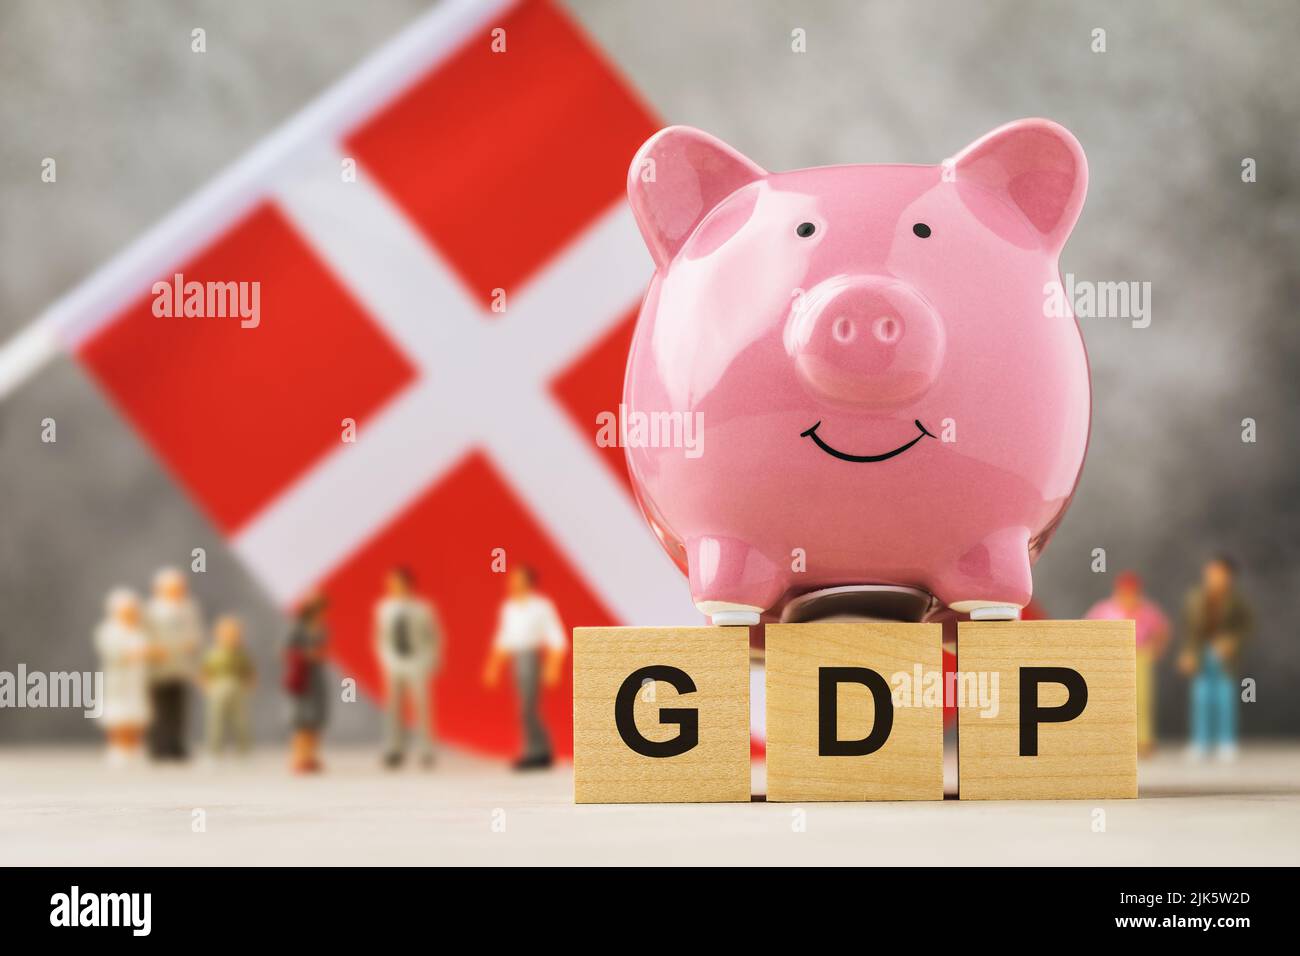 Piggy bank, wooden cubes with text, toy people made of plastic and a flag on an abstract background, a concept on the theme of Swedish GDP Stock Photo